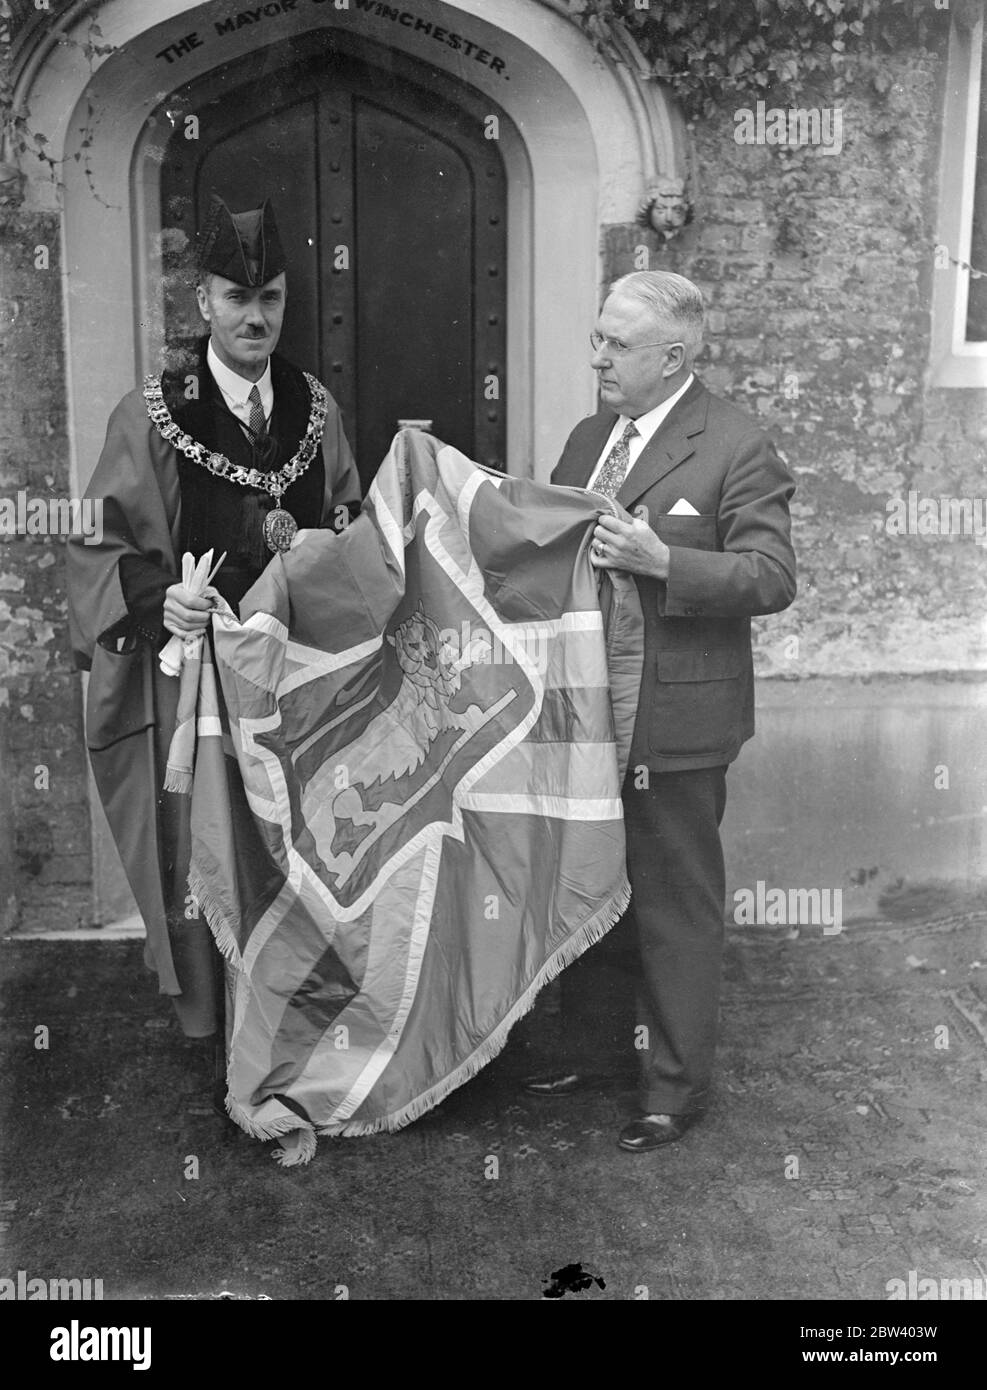 Mayor of Winchester (Virginia) presents flag to Mayor of Winchester (England). Dr C. R. Anderson, the Mayor of Winchester, Virginia, USA, presented to the Mayor of Winchester, Hampshire, at the Winchester Guildhall the large silk flag, inscribed key and scrawl which are the gift of the American Winchester to the people of their English namesake city. The flag is a replica of the city flag of Winchester, Virginia. Photo shows: the Mayor of Winchester, Virginia, Dr C. R. Anderson, presenting the flag to the mayor of Winchester, England, Councillor A. T. Edmonds (robes) at Winchester, Hants. 16 S Stock Photo